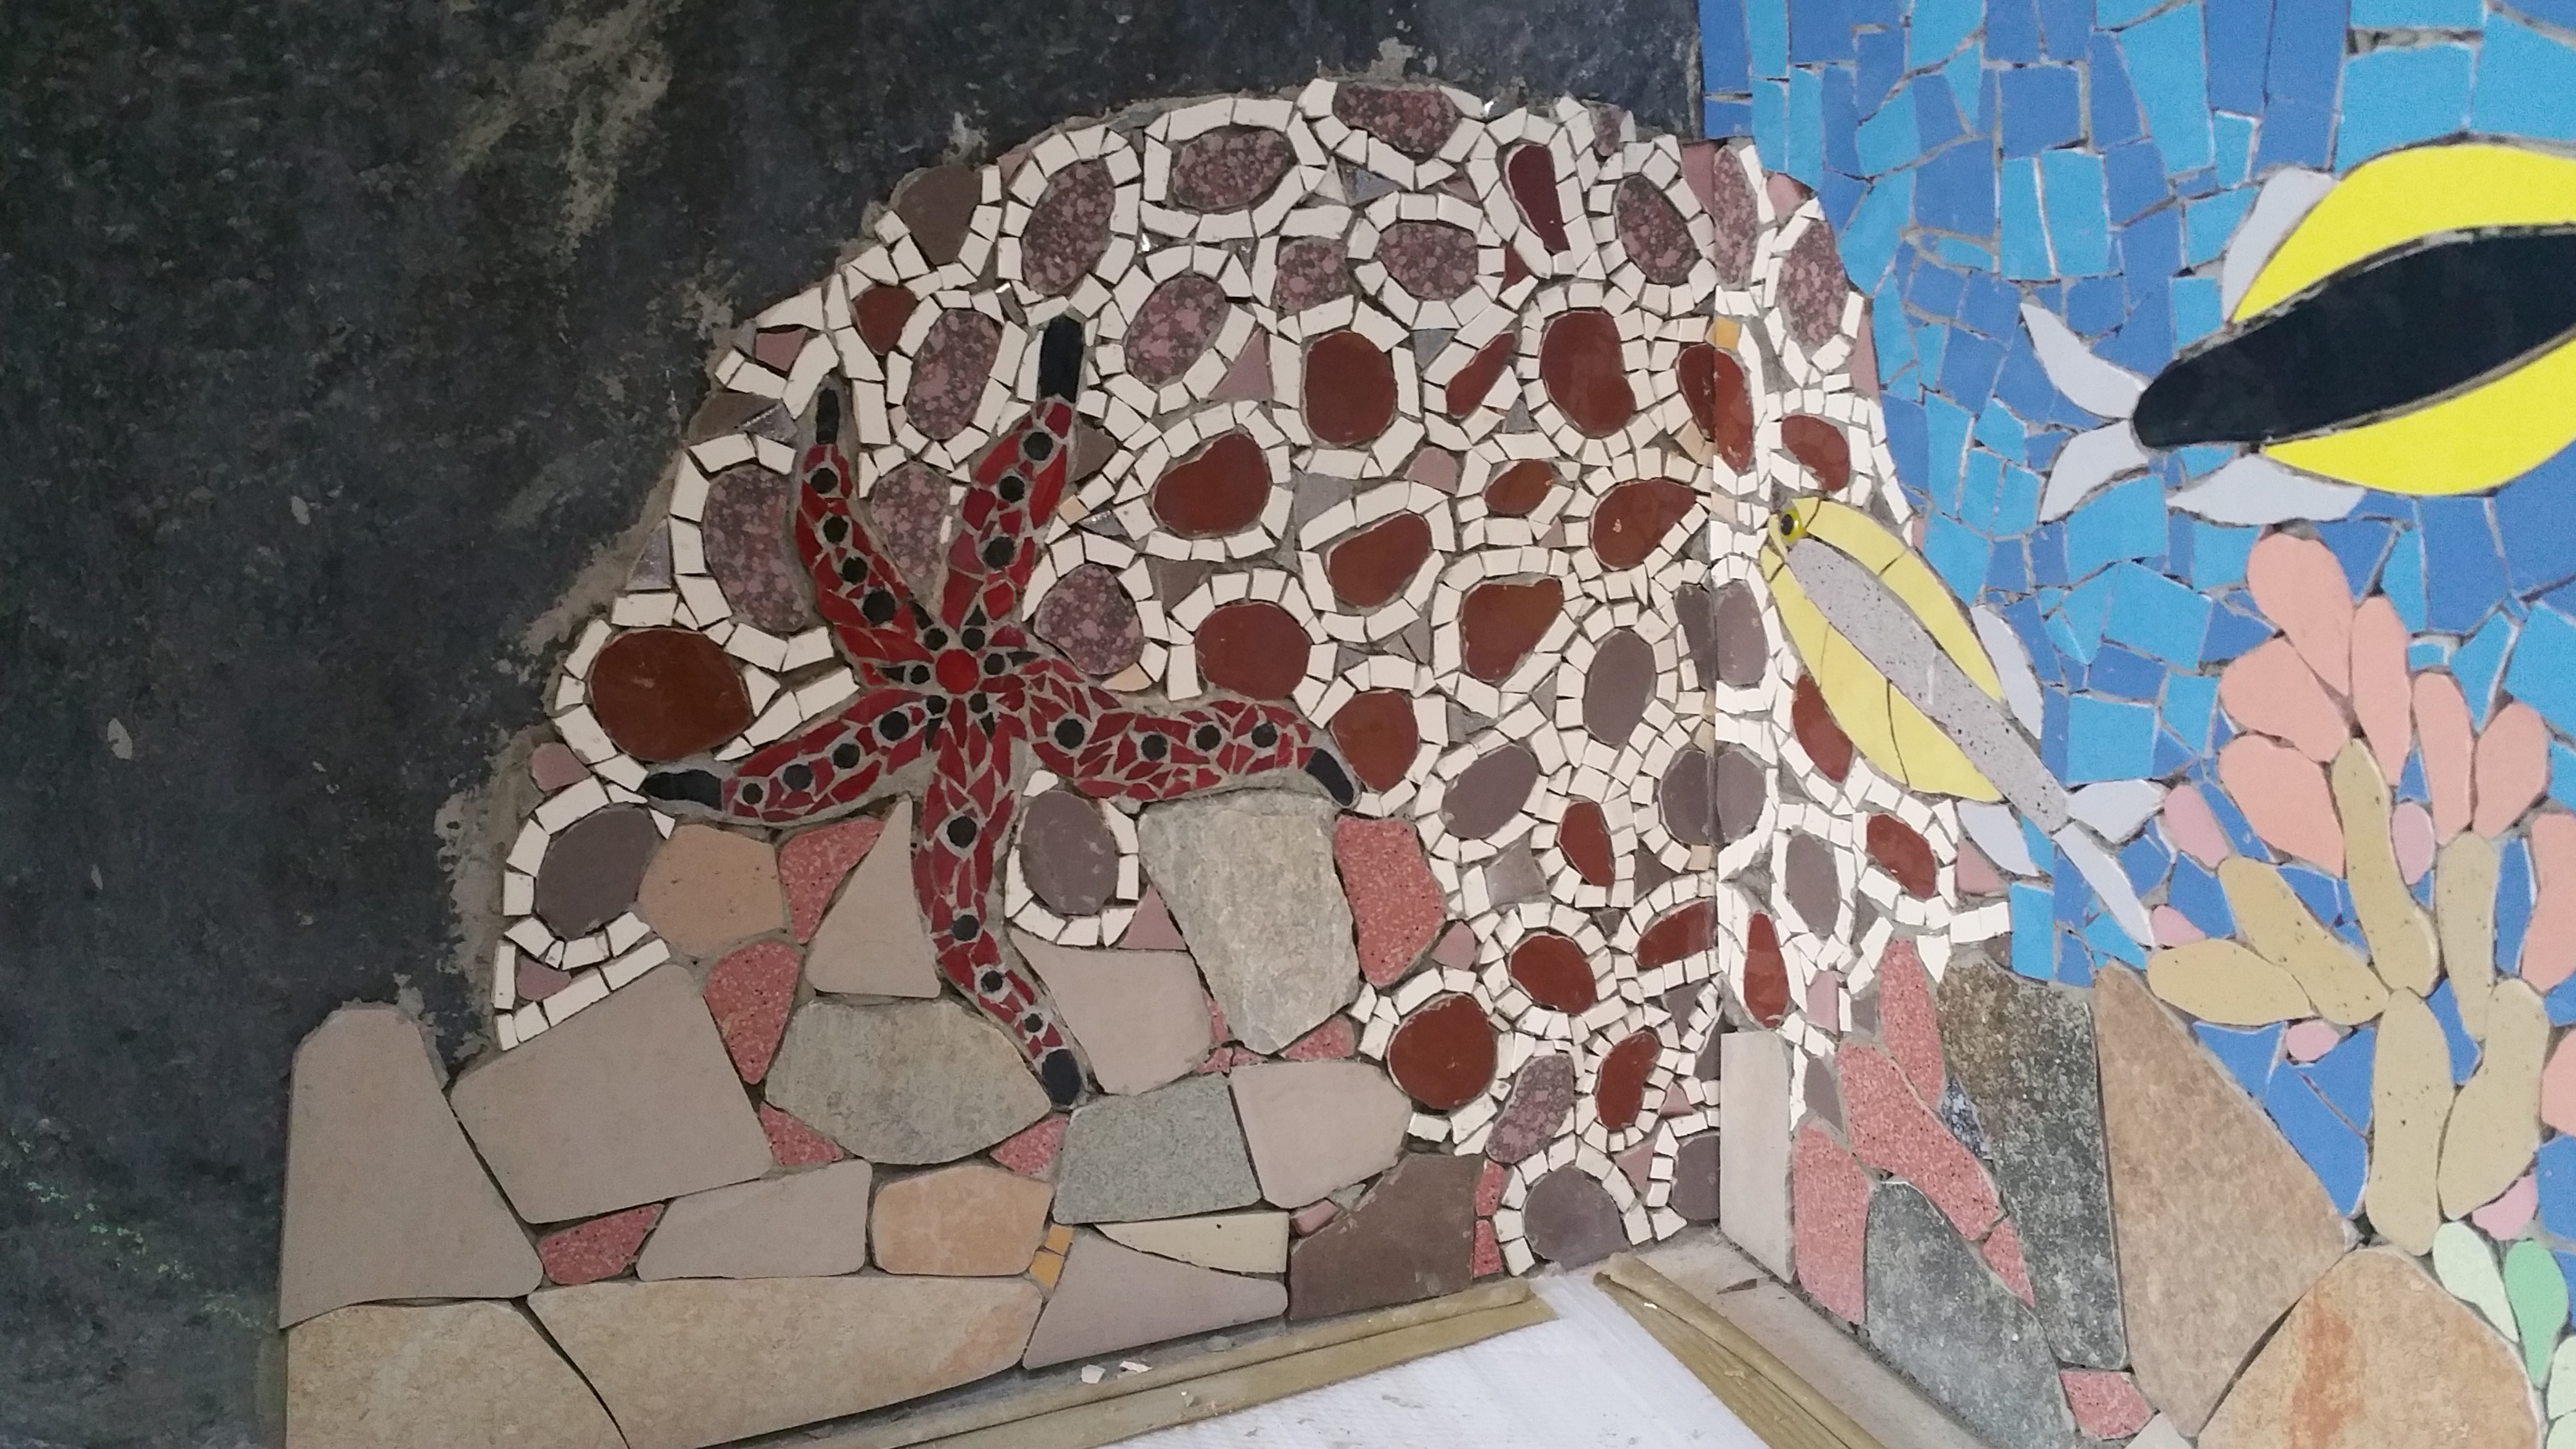 Coral (tiles) and sea star (glass)